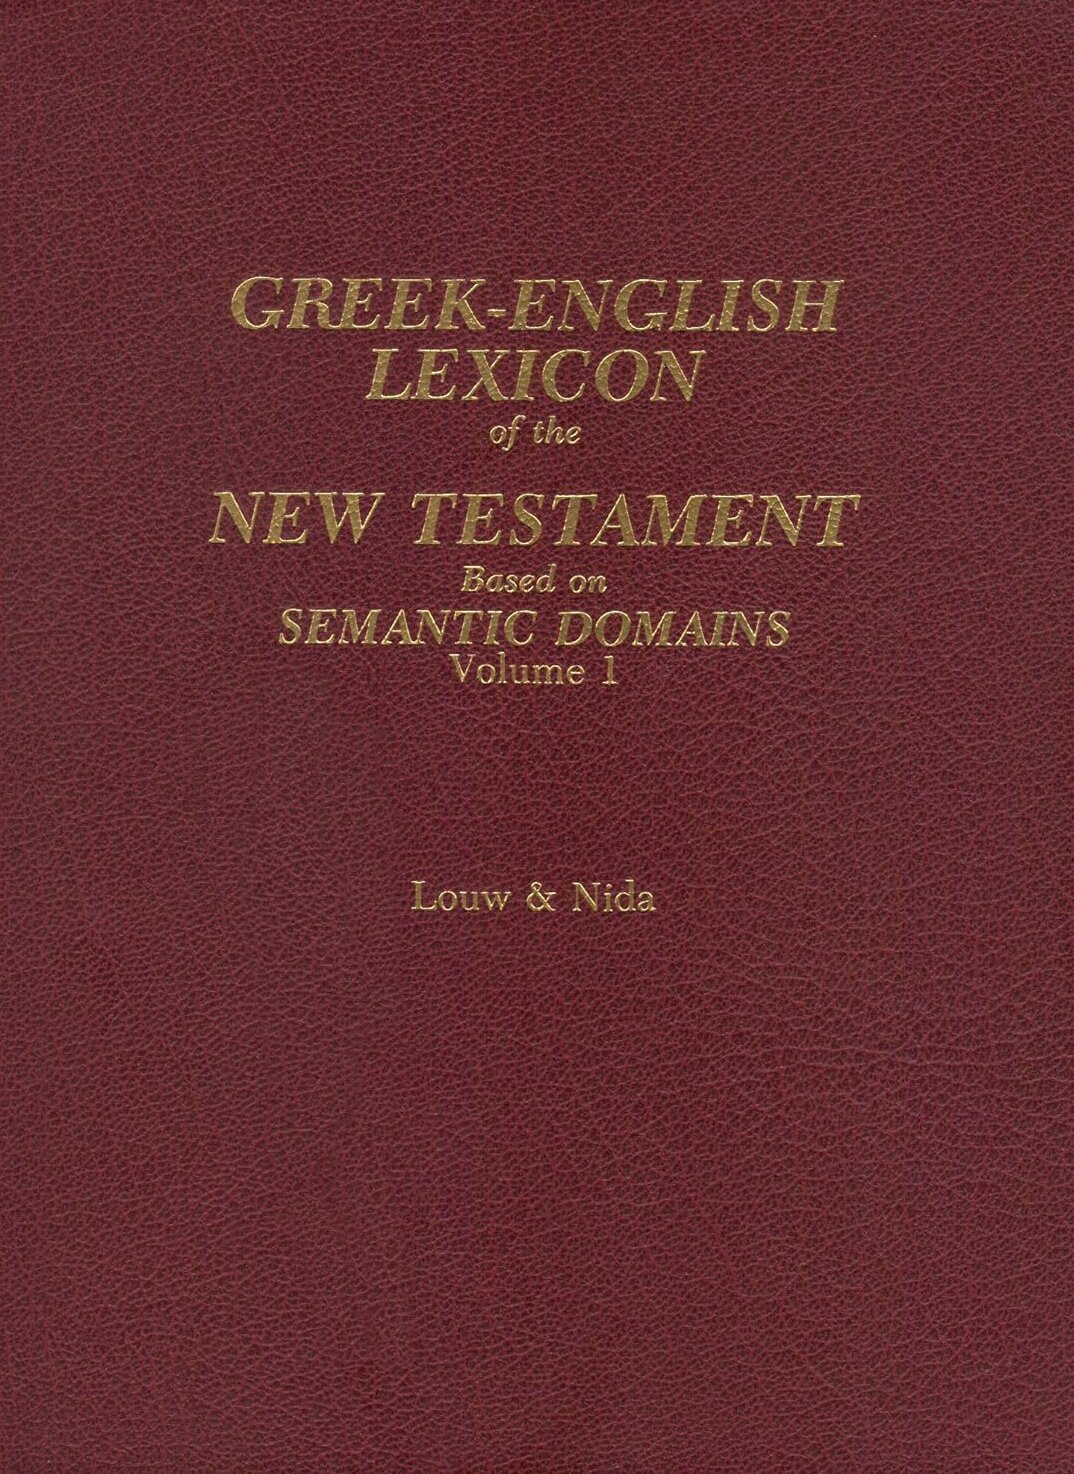 Greek-English Lexicon of the New Testament Based on Semantic Domains